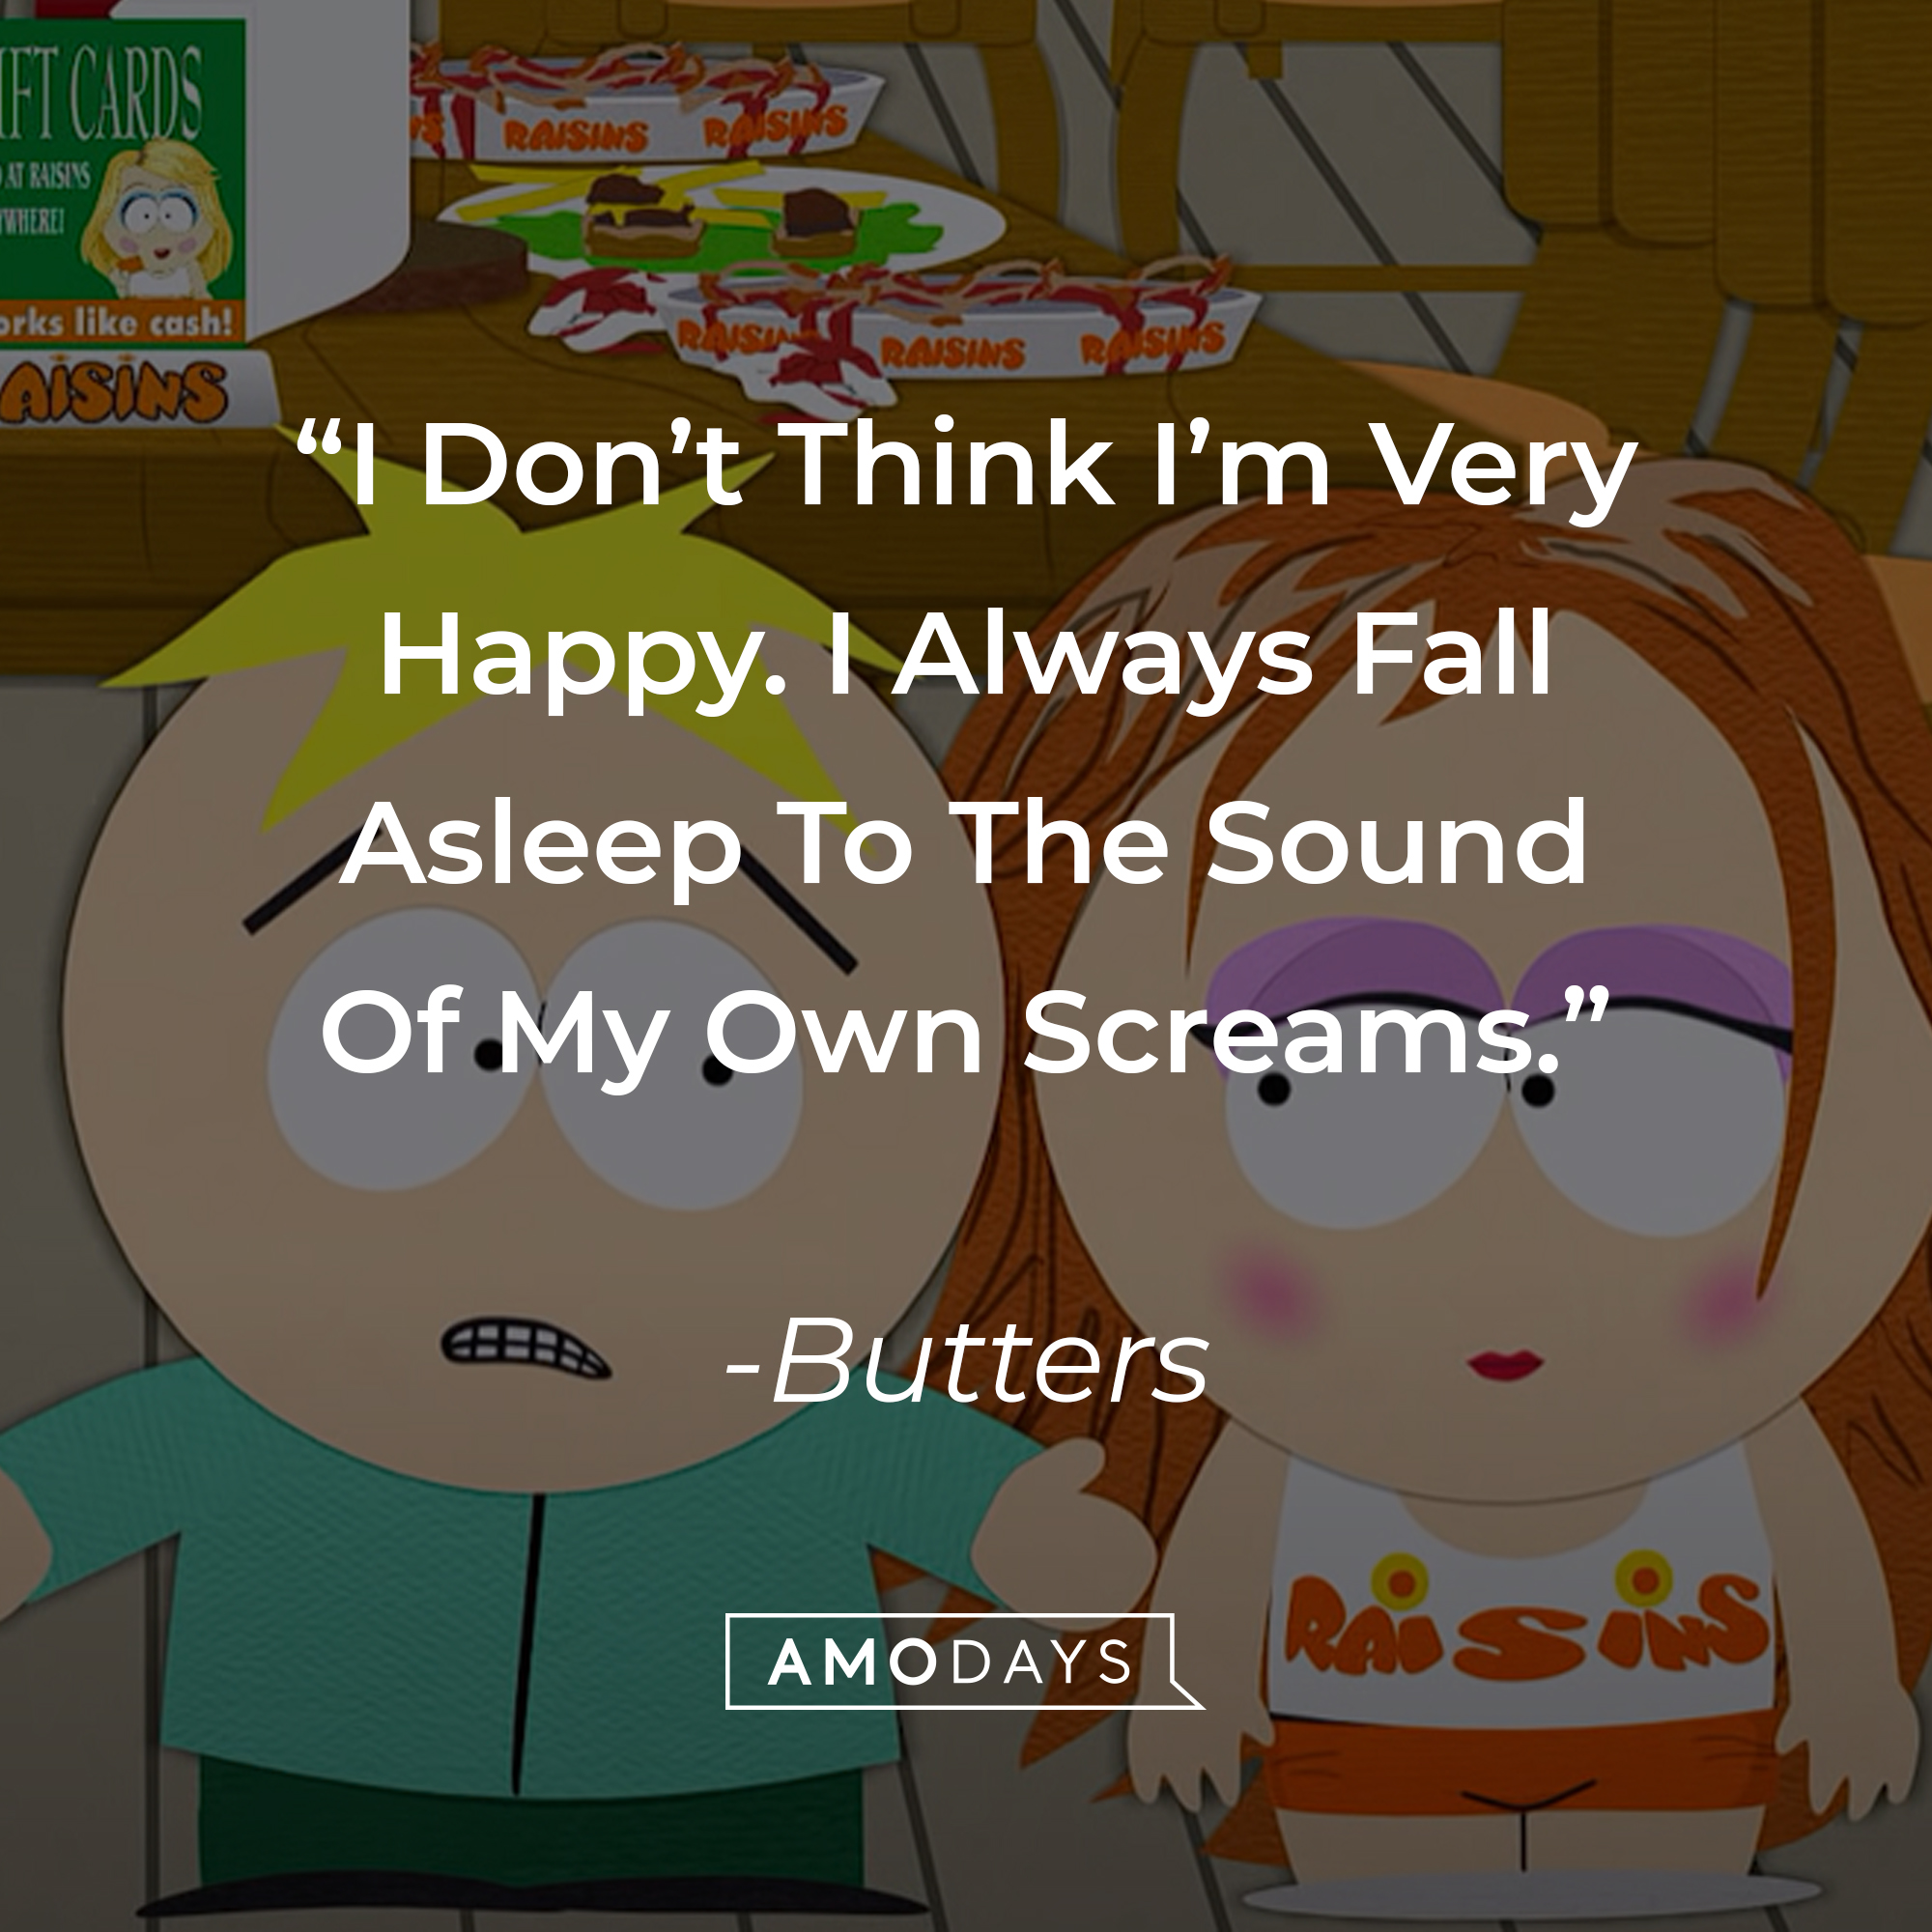 Butters' quote: "I Don't Think I'm Very Happy. I Always Fall Asleep To The Sound Of My Own Screams." | Source: youtube.com/southpark